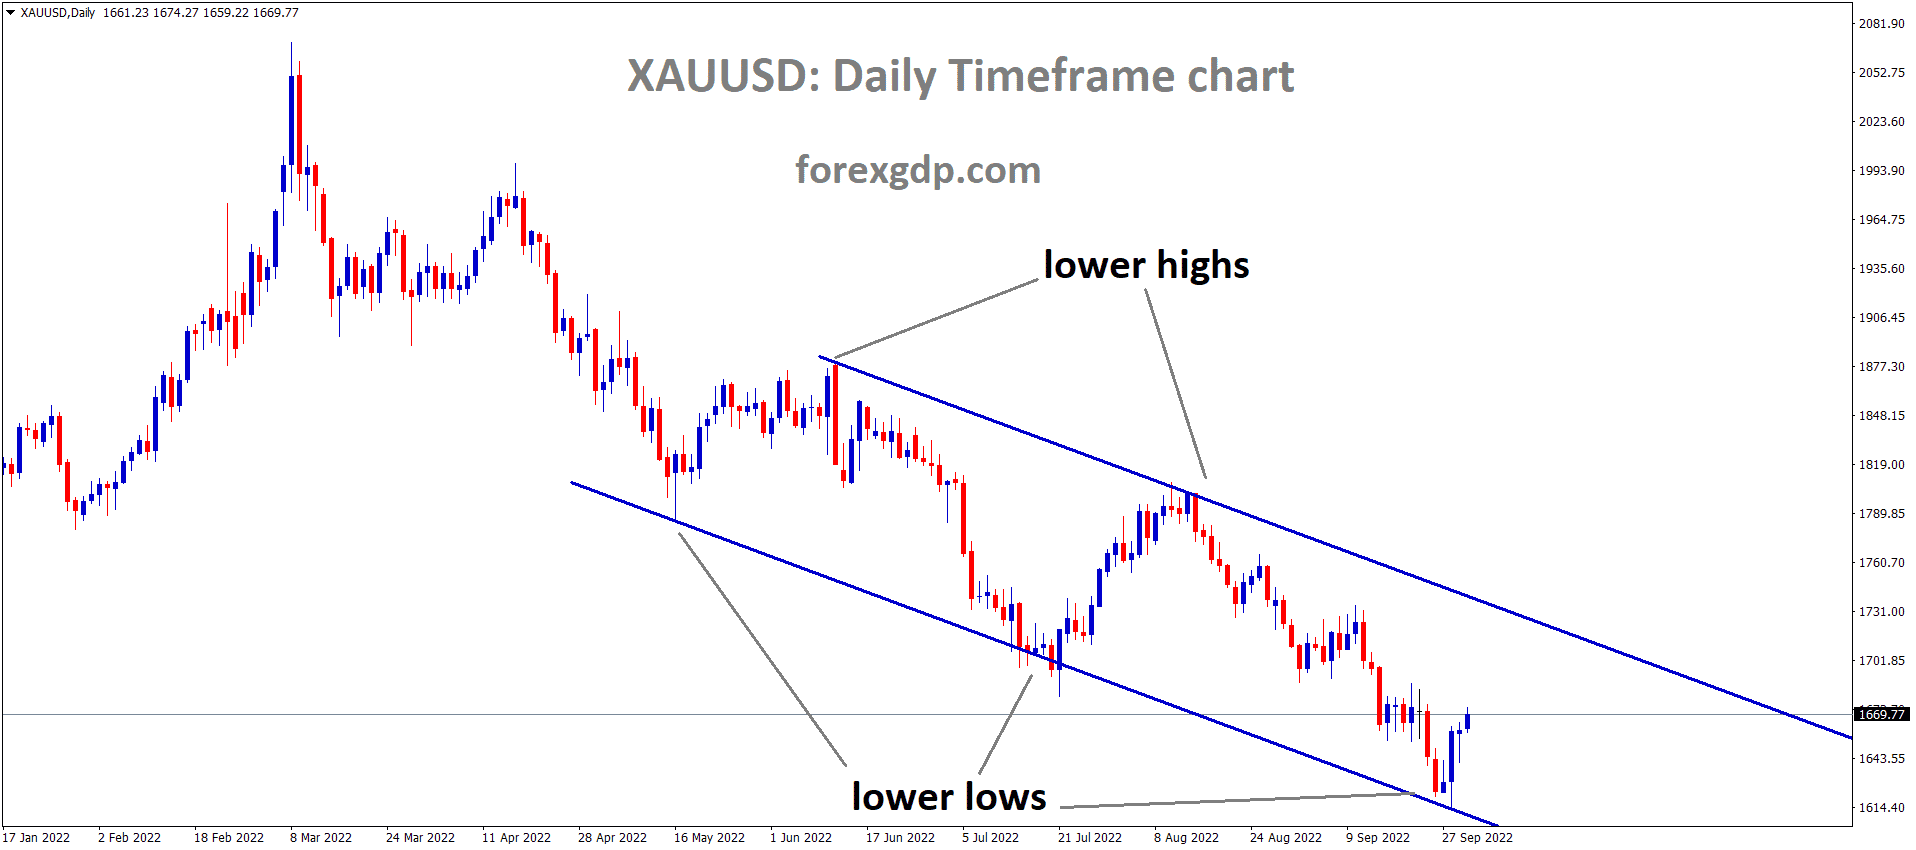 XAUUSD Gold price is moving in the Descending channel and the market has rebounded from the lower low area of the channel. 2